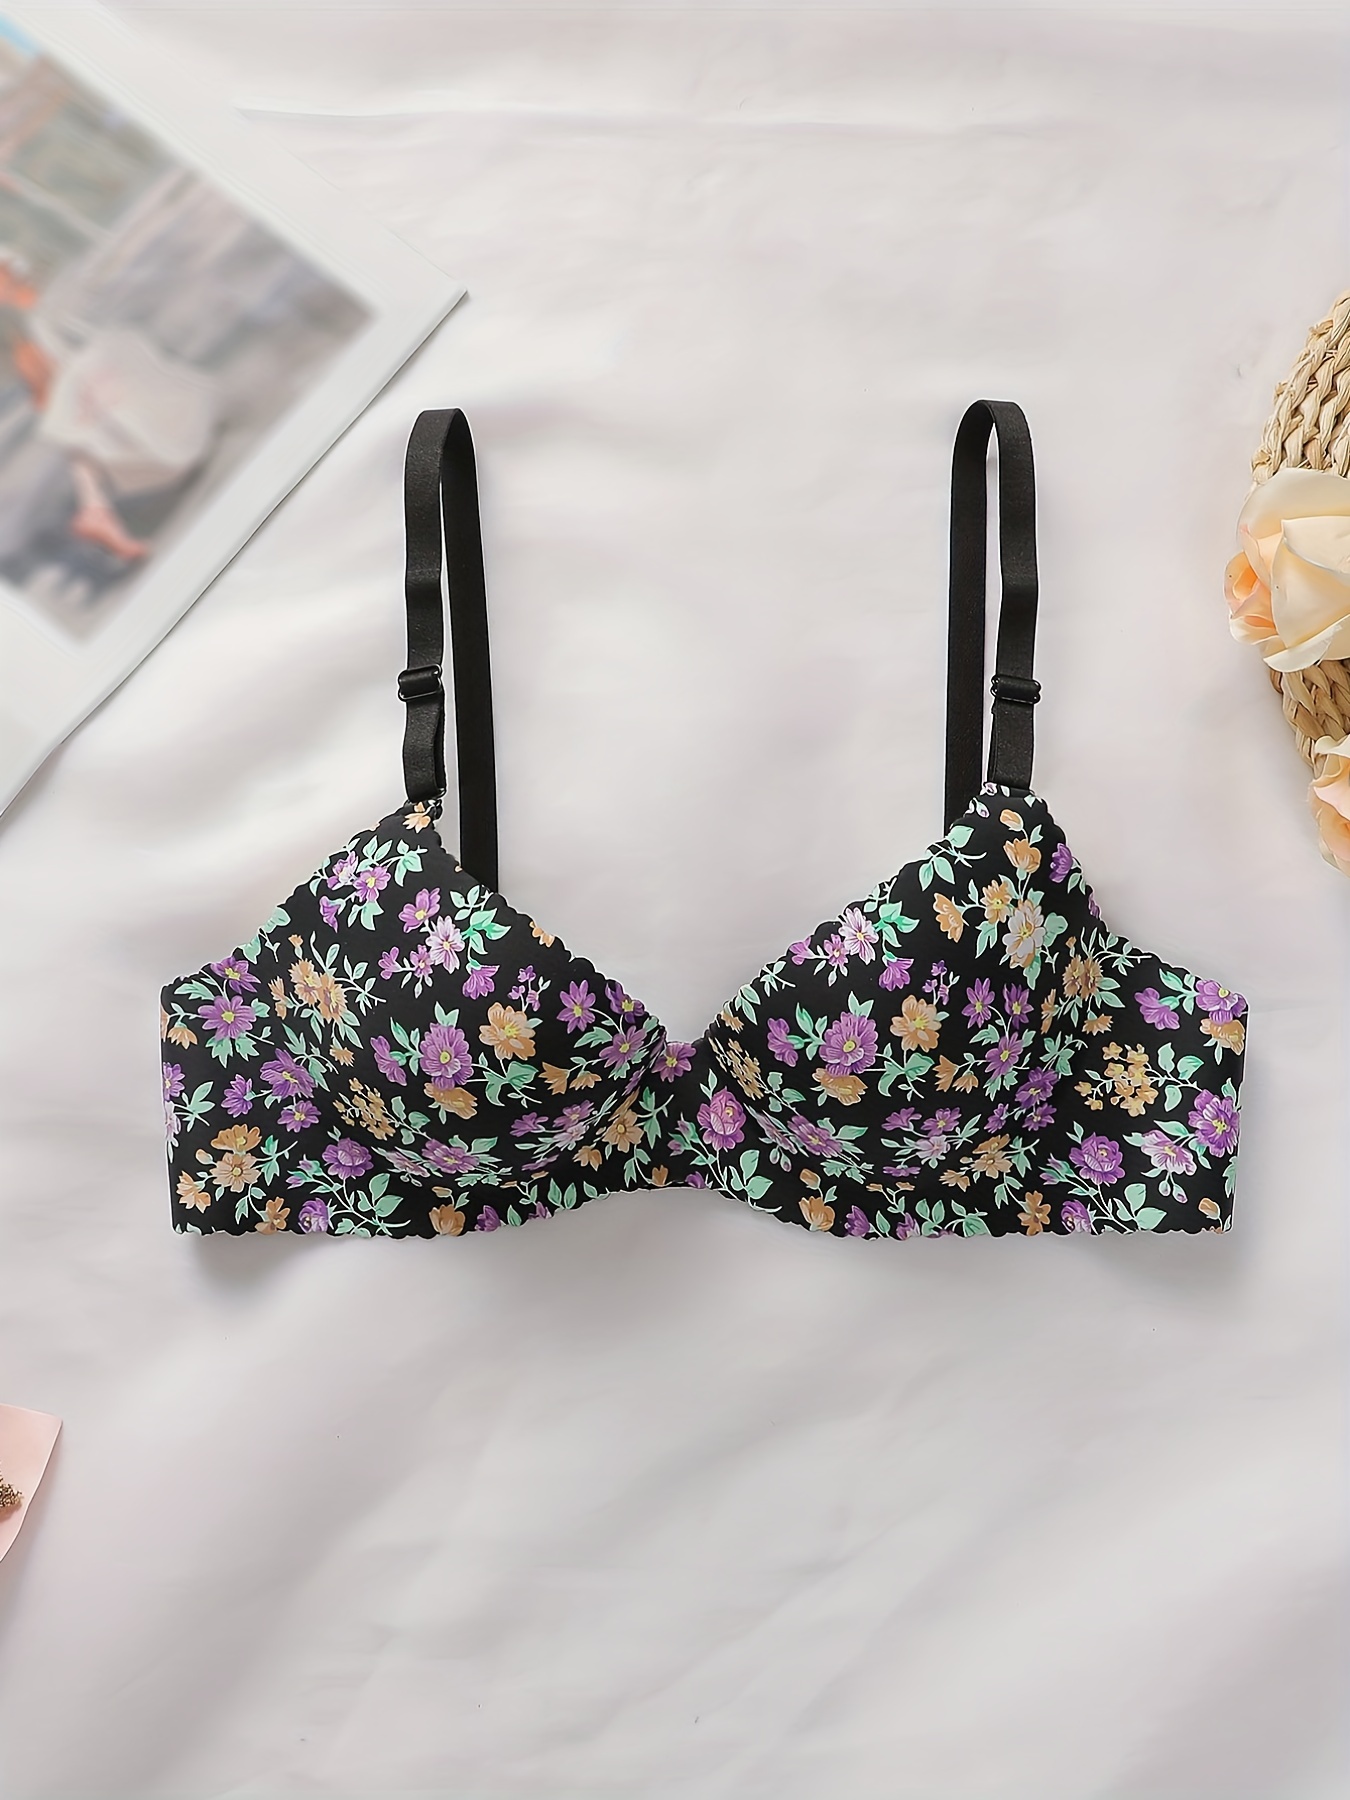 Push up bra with floral print